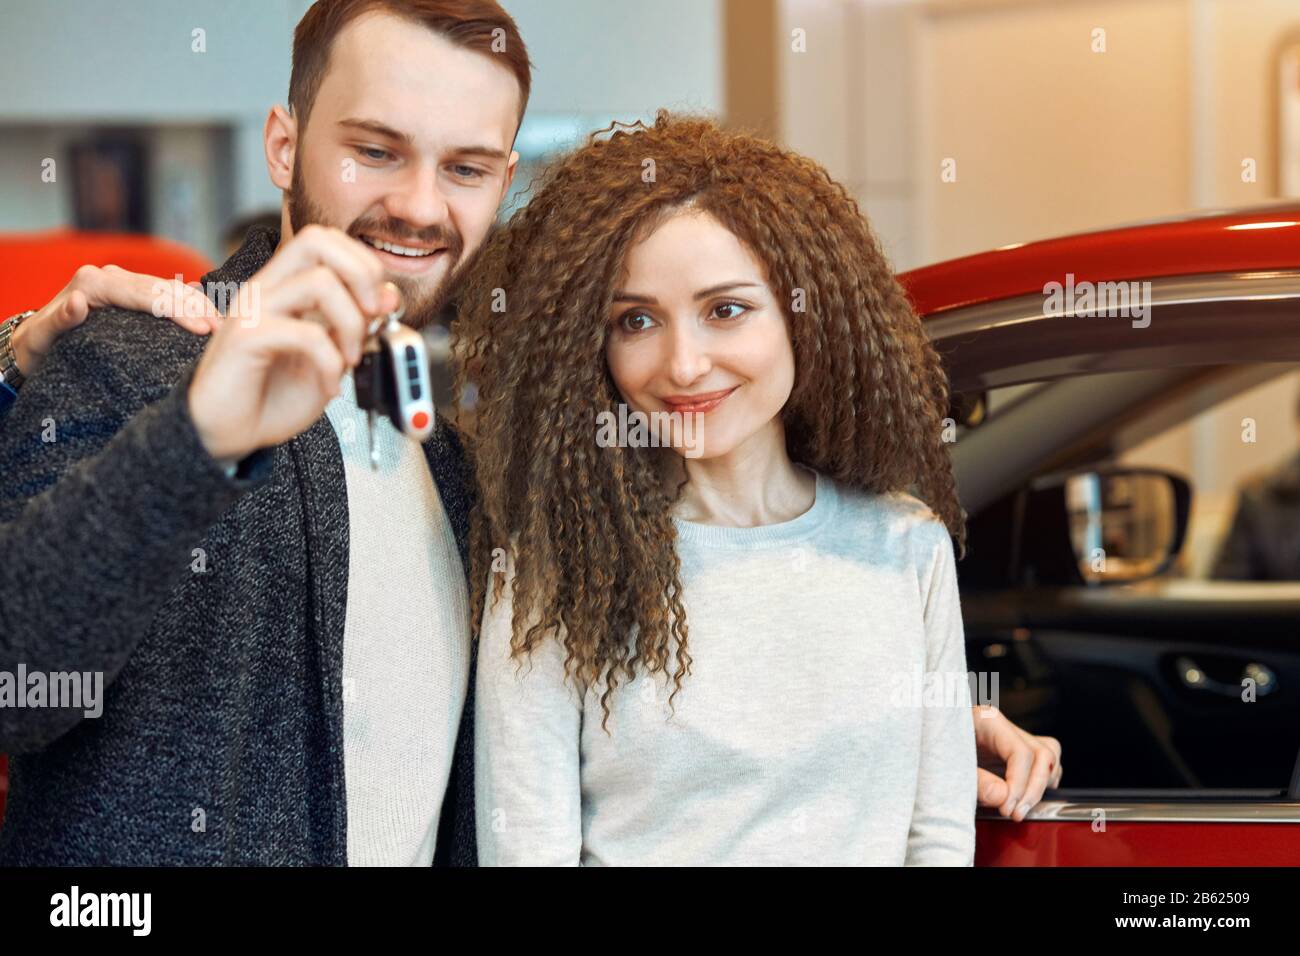 young couple has bought a car, close up photo. man presenting a car for his woman. close up photo. red car in the background of the photo Stock Photo